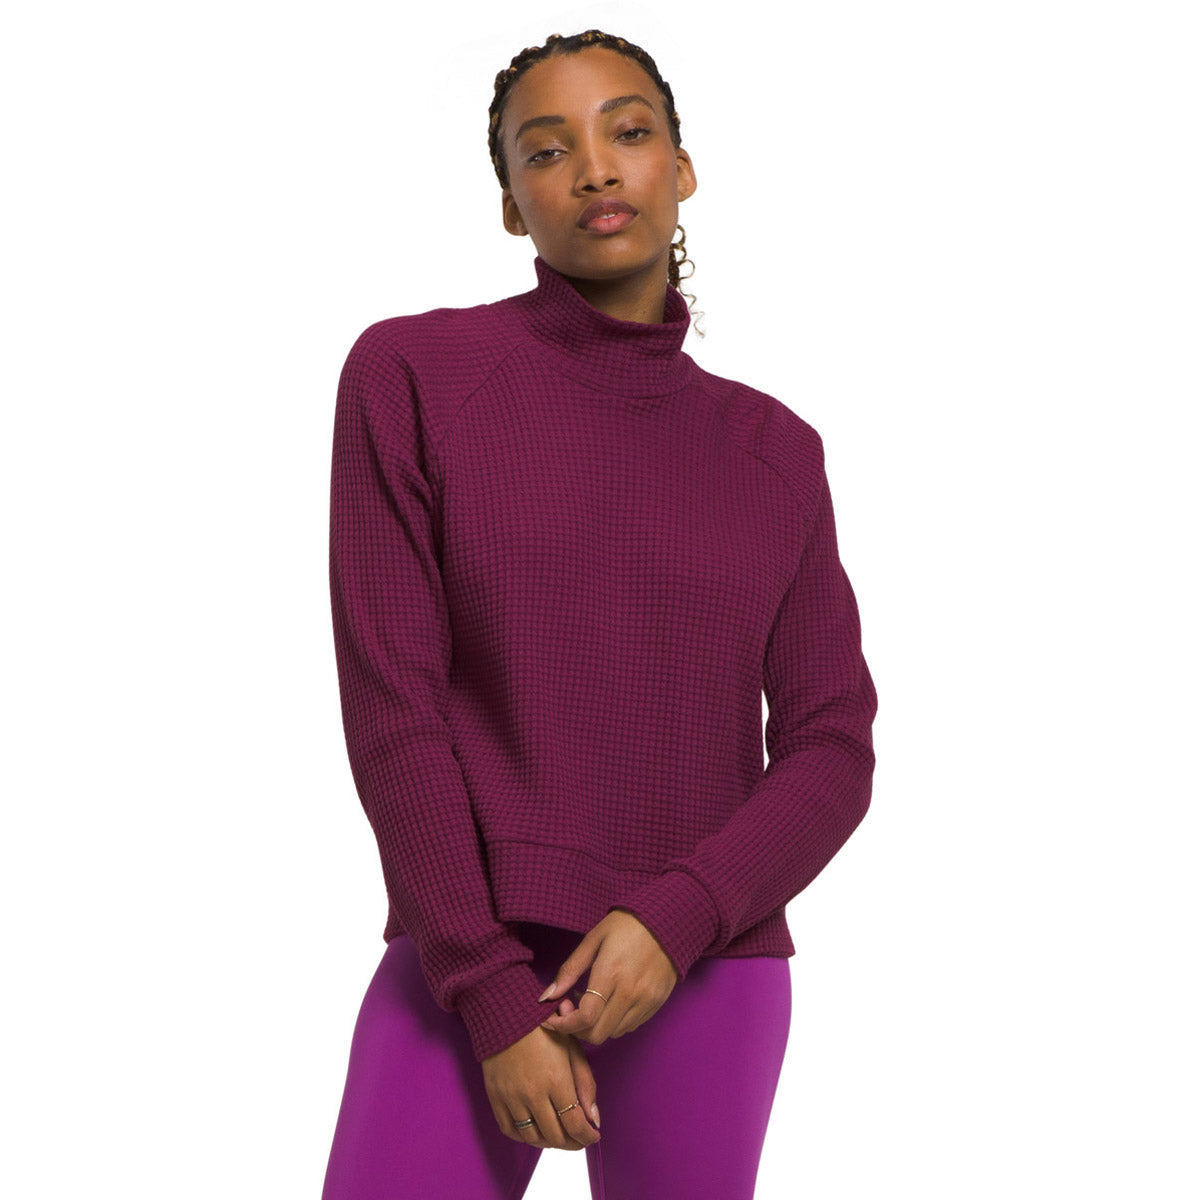 The North Face Women's Chabot Mock Neck Long Sleeve Sweater